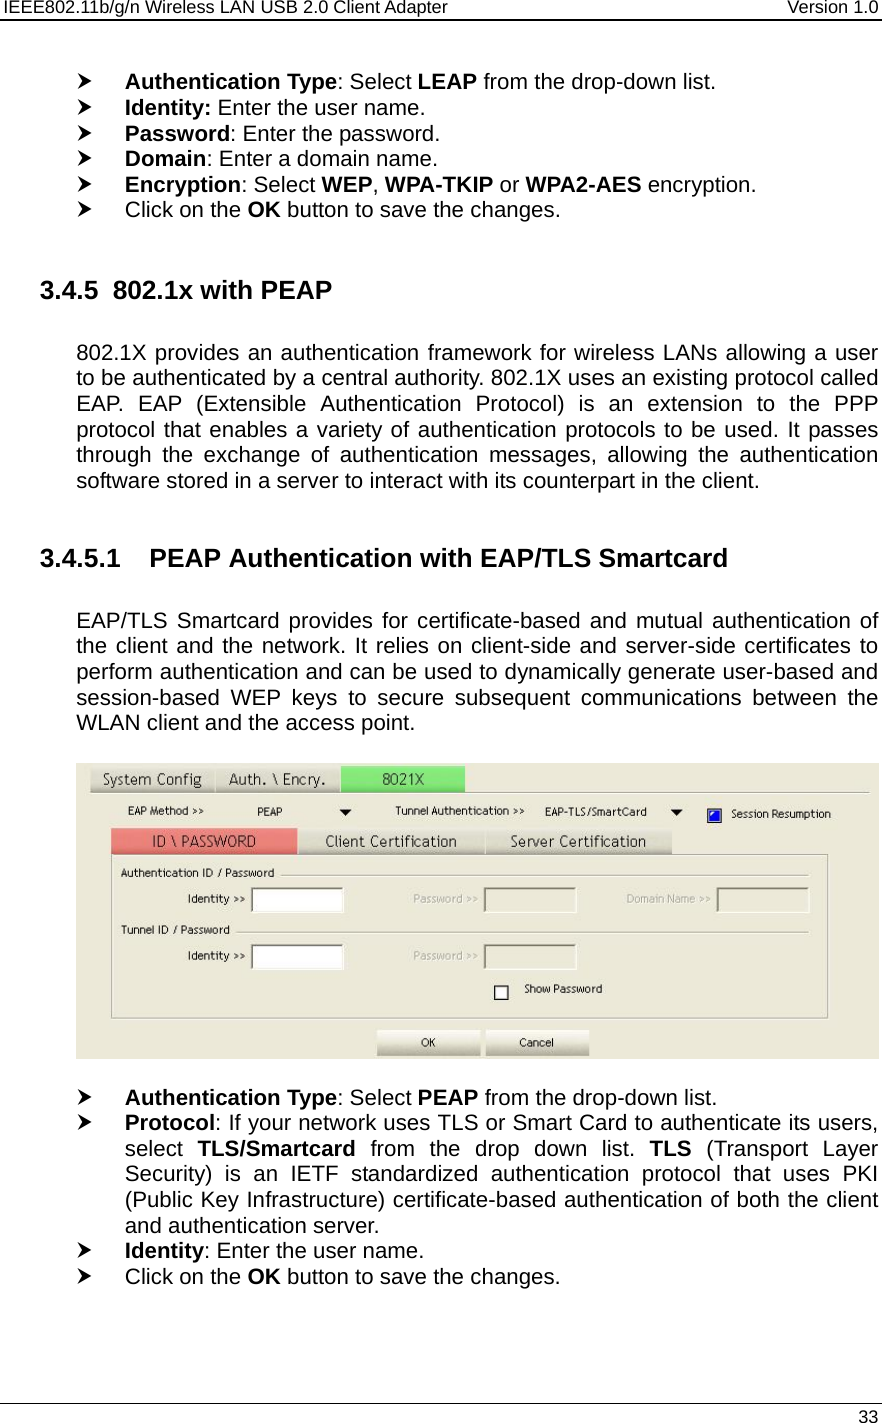 IEEE802.11b/g/n Wireless LAN USB 2.0 Client Adapter  Version 1.0   33  h Authentication Type: Select LEAP from the drop-down list.  h Identity: Enter the user name. h Password: Enter the password. h Domain: Enter a domain name. h Encryption: Select WEP, WPA-TKIP or WPA2-AES encryption. h Click on the OK button to save the changes.   3.4.5 802.1x with PEAP  802.1X provides an authentication framework for wireless LANs allowing a user to be authenticated by a central authority. 802.1X uses an existing protocol called EAP. EAP (Extensible Authentication Protocol) is an extension to the PPP protocol that enables a variety of authentication protocols to be used. It passes through the exchange of authentication messages, allowing the authentication software stored in a server to interact with its counterpart in the client.  3.4.5.1  PEAP Authentication with EAP/TLS Smartcard  EAP/TLS Smartcard provides for certificate-based and mutual authentication of the client and the network. It relies on client-side and server-side certificates to perform authentication and can be used to dynamically generate user-based and session-based WEP keys to secure subsequent communications between the WLAN client and the access point.    h Authentication Type: Select PEAP from the drop-down list.  h Protocol: If your network uses TLS or Smart Card to authenticate its users, select  TLS/Smartcard from the drop down list. TLS (Transport Layer Security) is an IETF standardized authentication protocol that uses PKI (Public Key Infrastructure) certificate-based authentication of both the client and authentication server. h Identity: Enter the user name. h Click on the OK button to save the changes.     